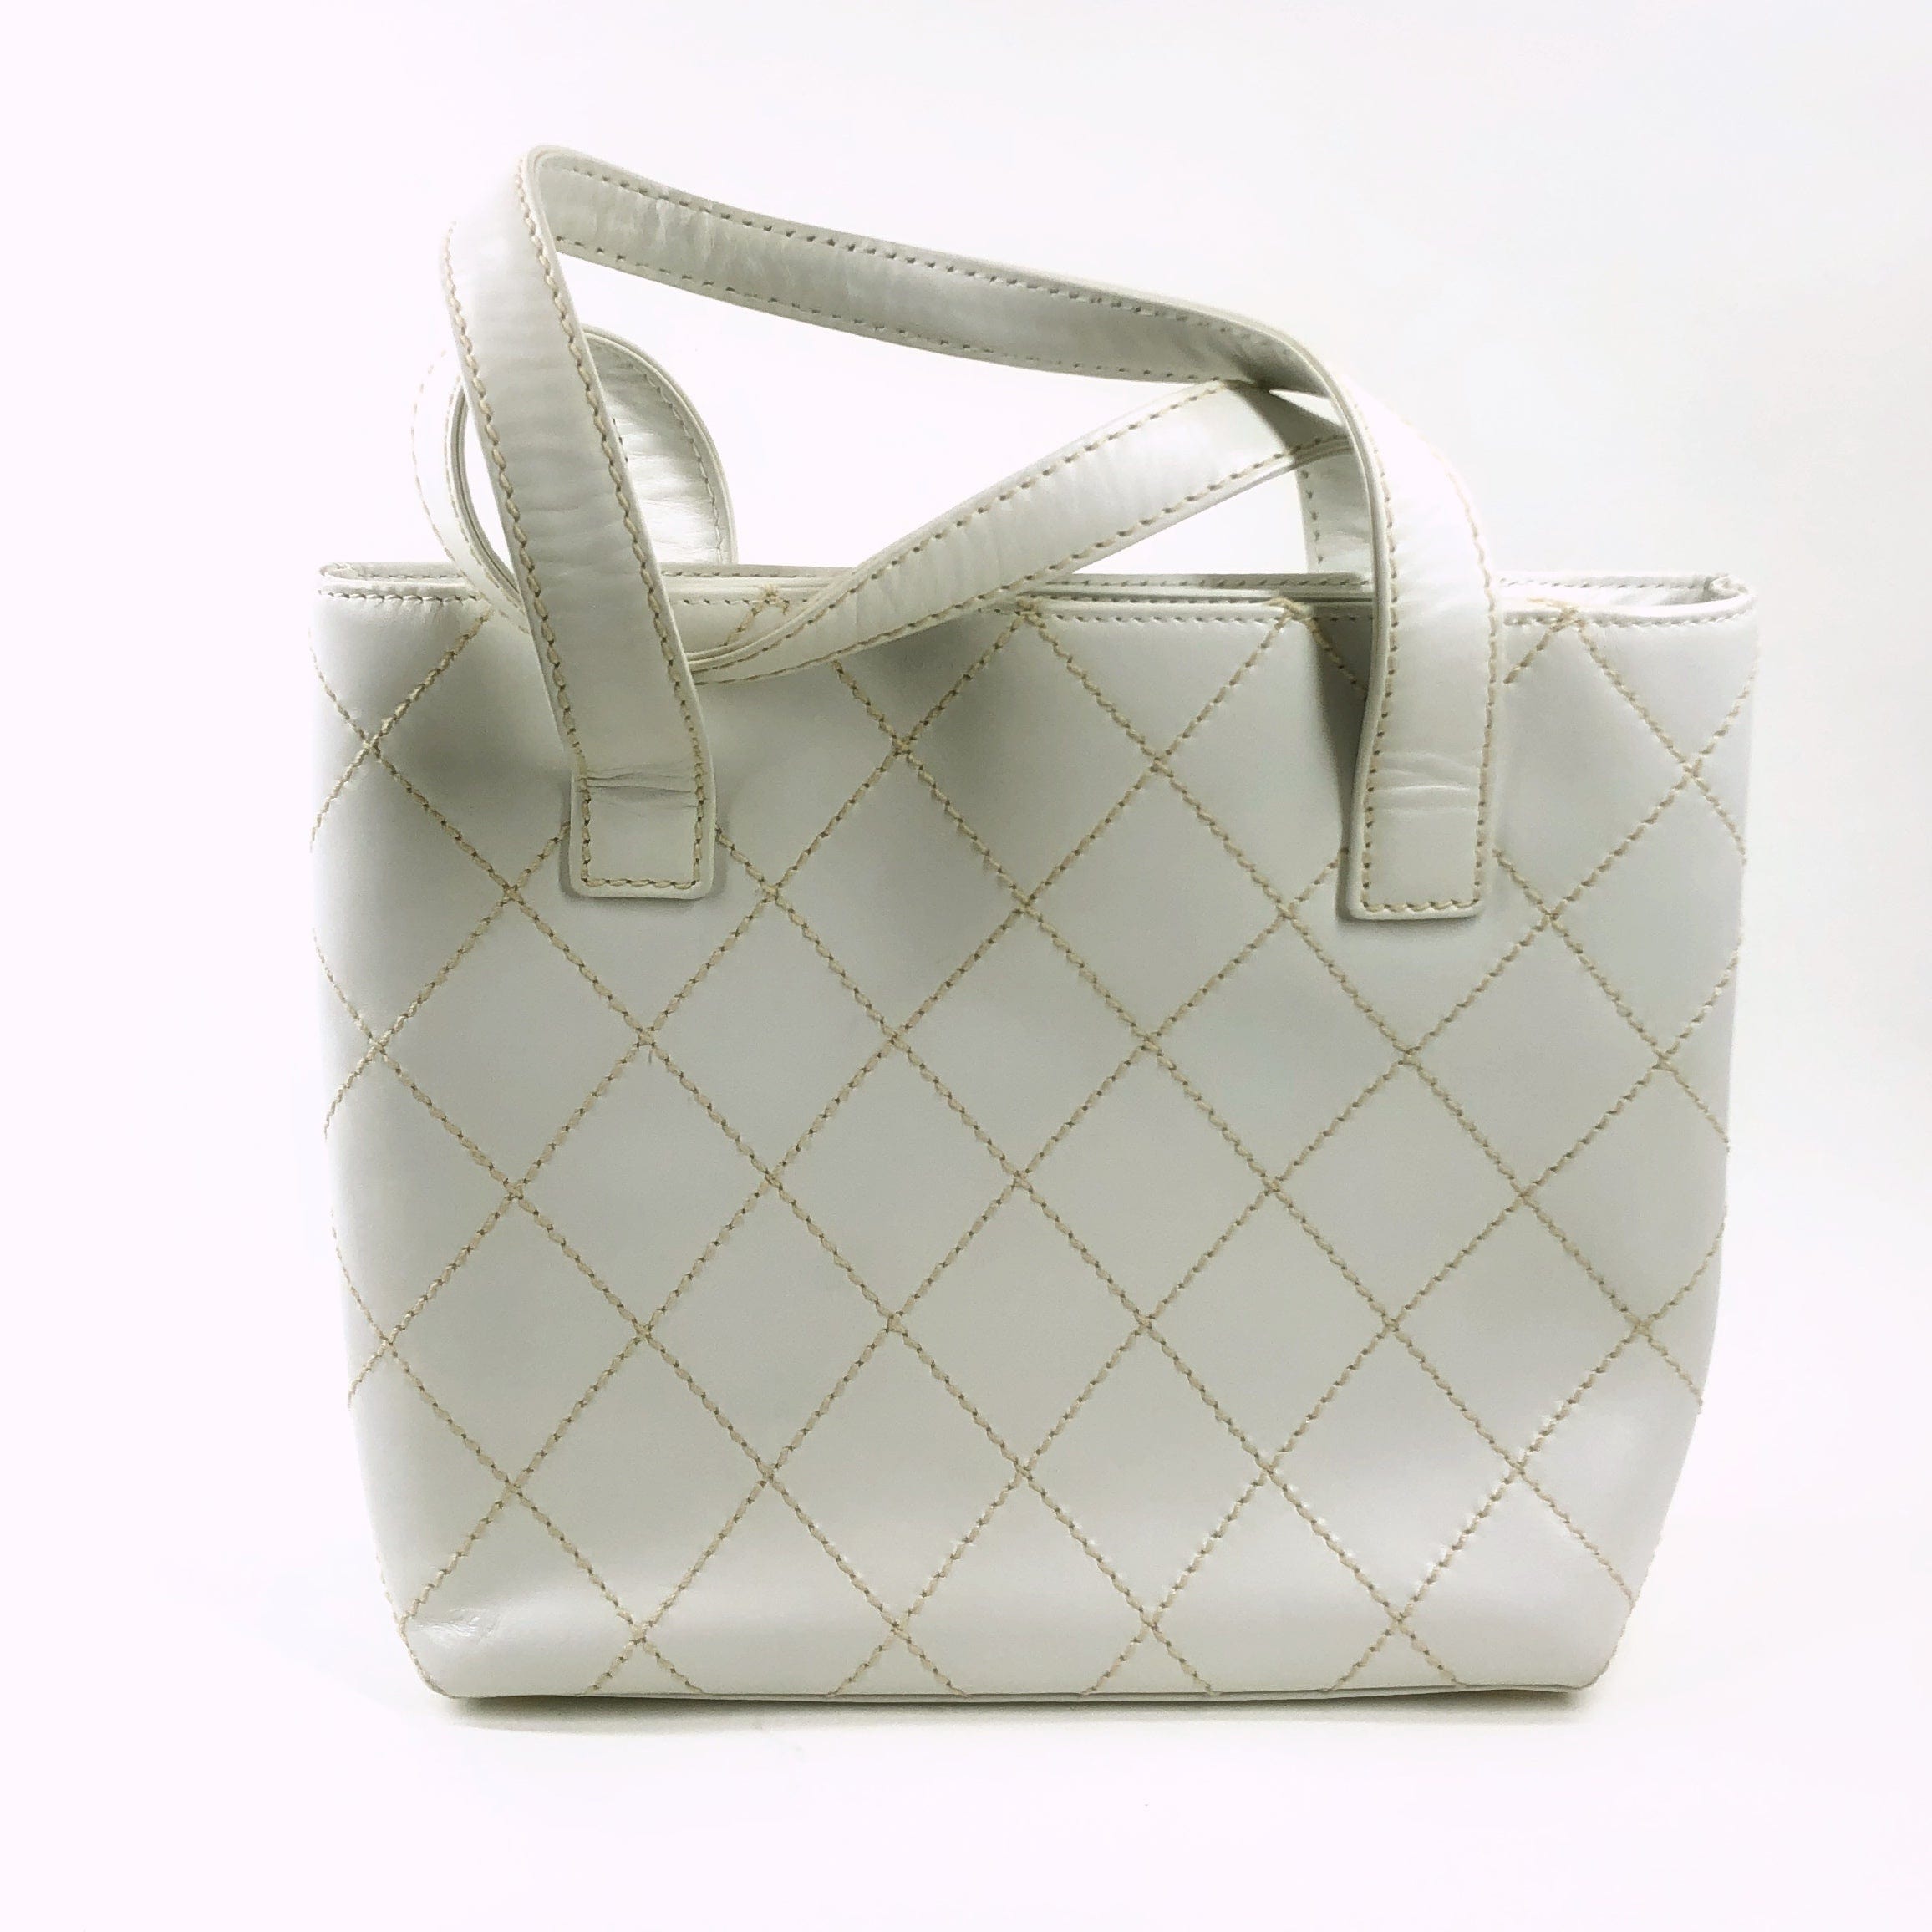 Chanel Chanel Wild Stitch Tote Bag in Leather White PXL1679